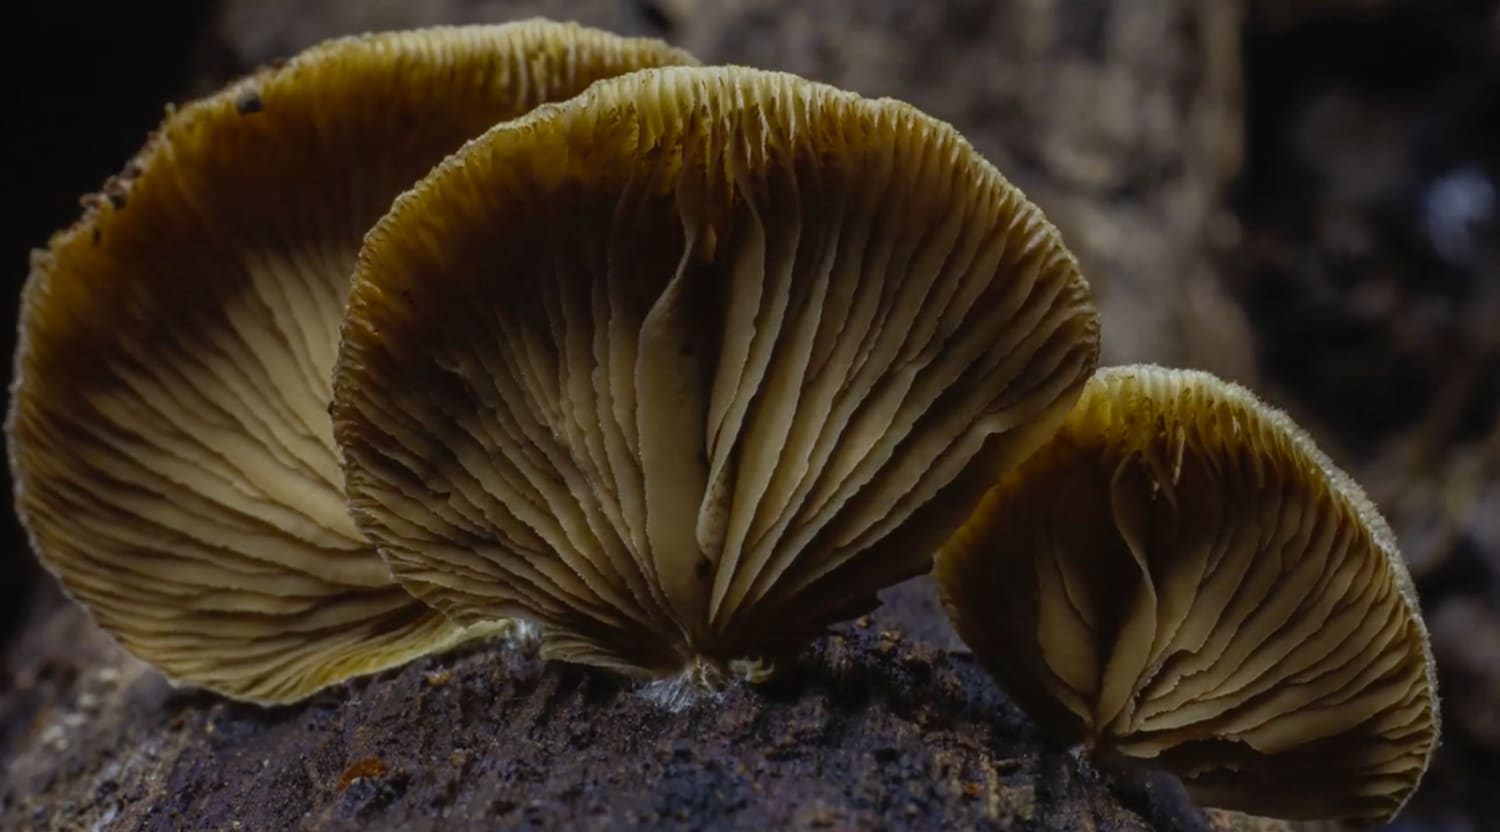 Watch an Amazing Time-Lapse of Growing Mushrooms